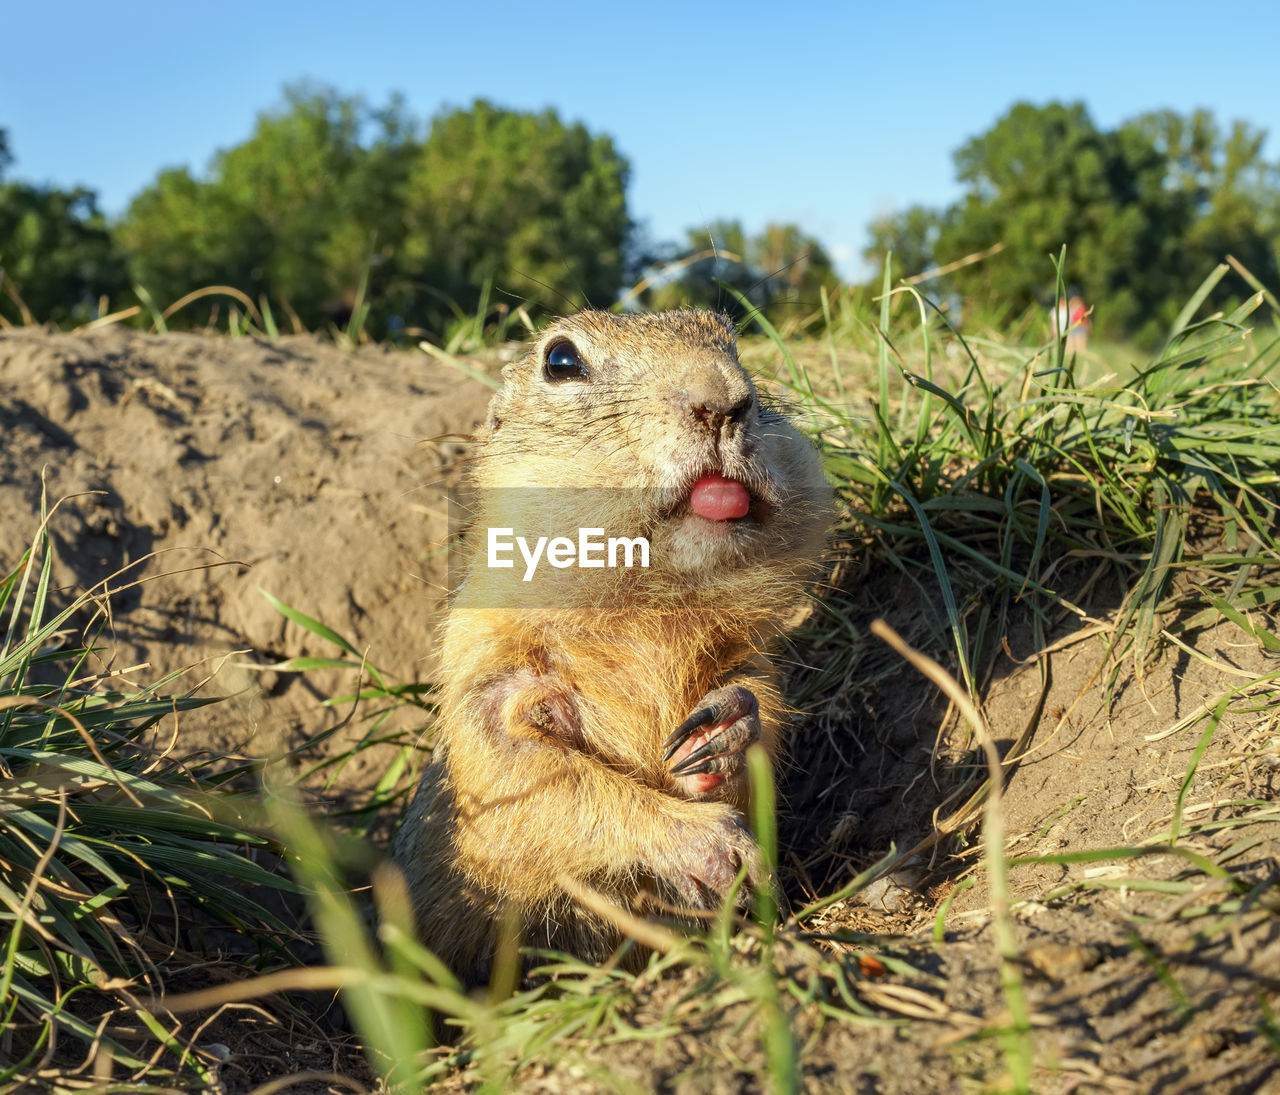 animal, animal themes, mammal, animal wildlife, one animal, wildlife, nature, rodent, plant, no people, grass, eating, prairie dog, day, squirrel, outdoors, sky, close-up, food, portrait, land, tree, animal body part